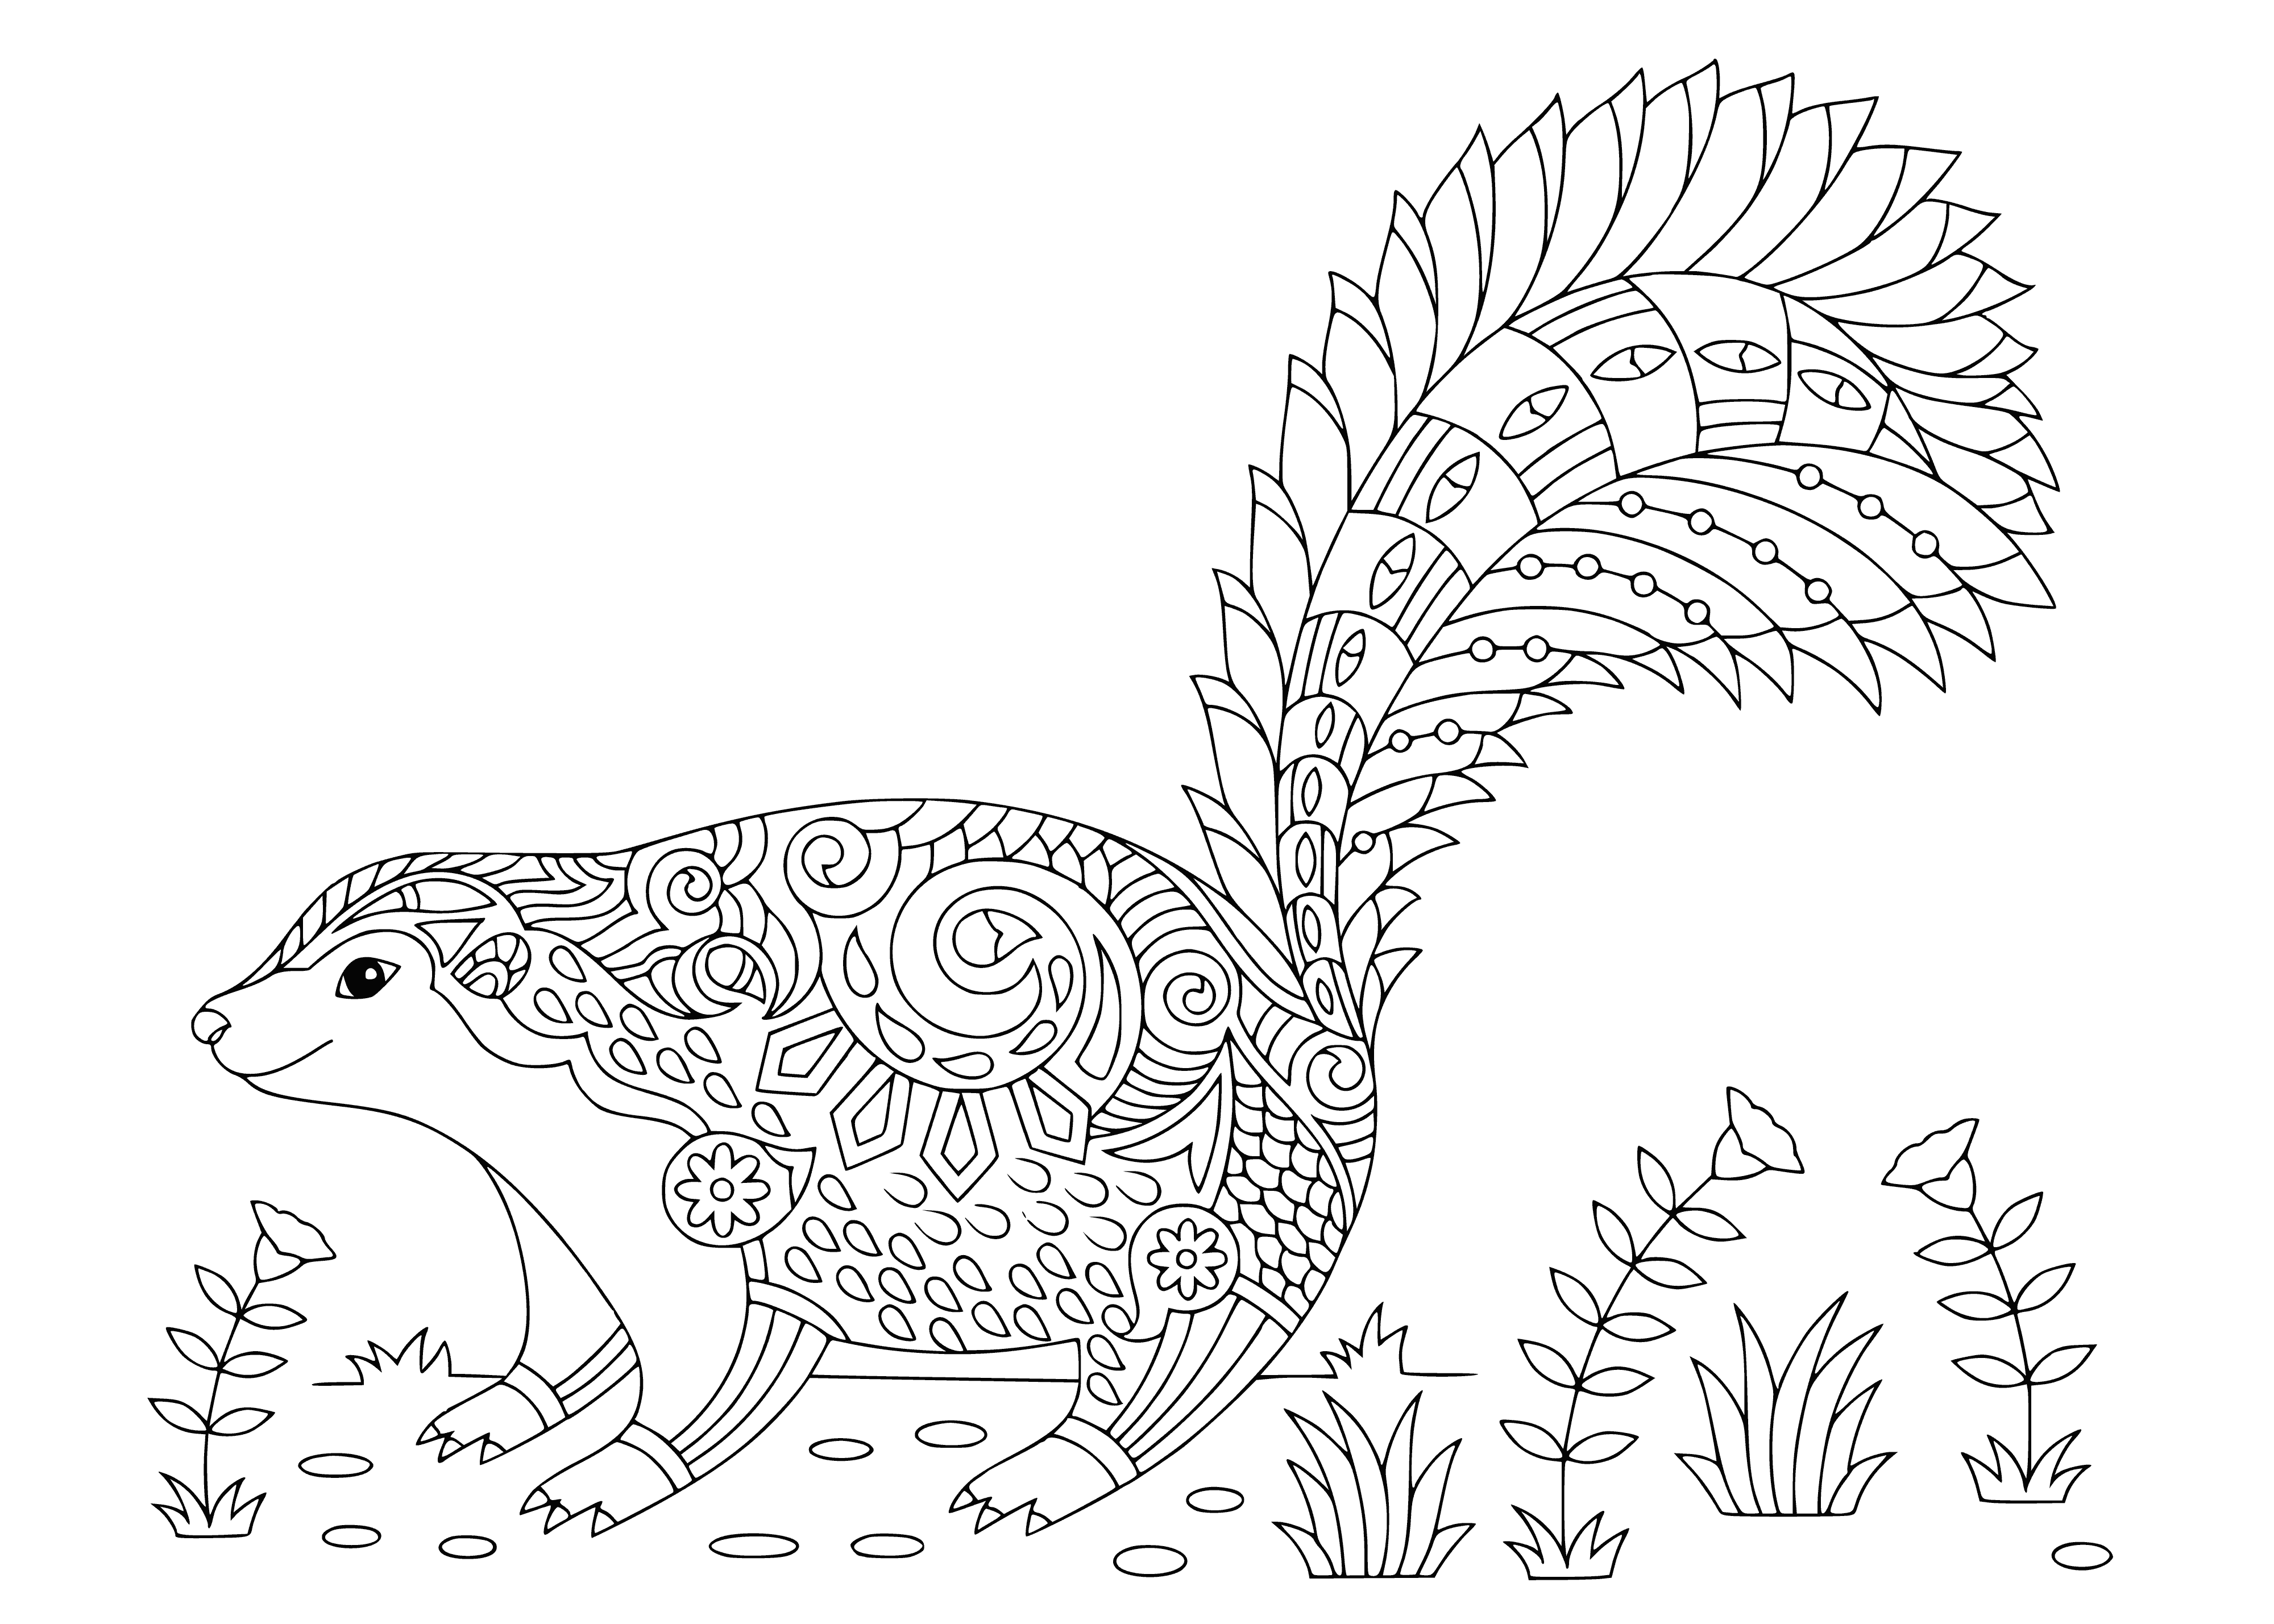 coloring page: Nocturnal skunk sprays foul-smelling liquid to deter predators. Active mainly at night.